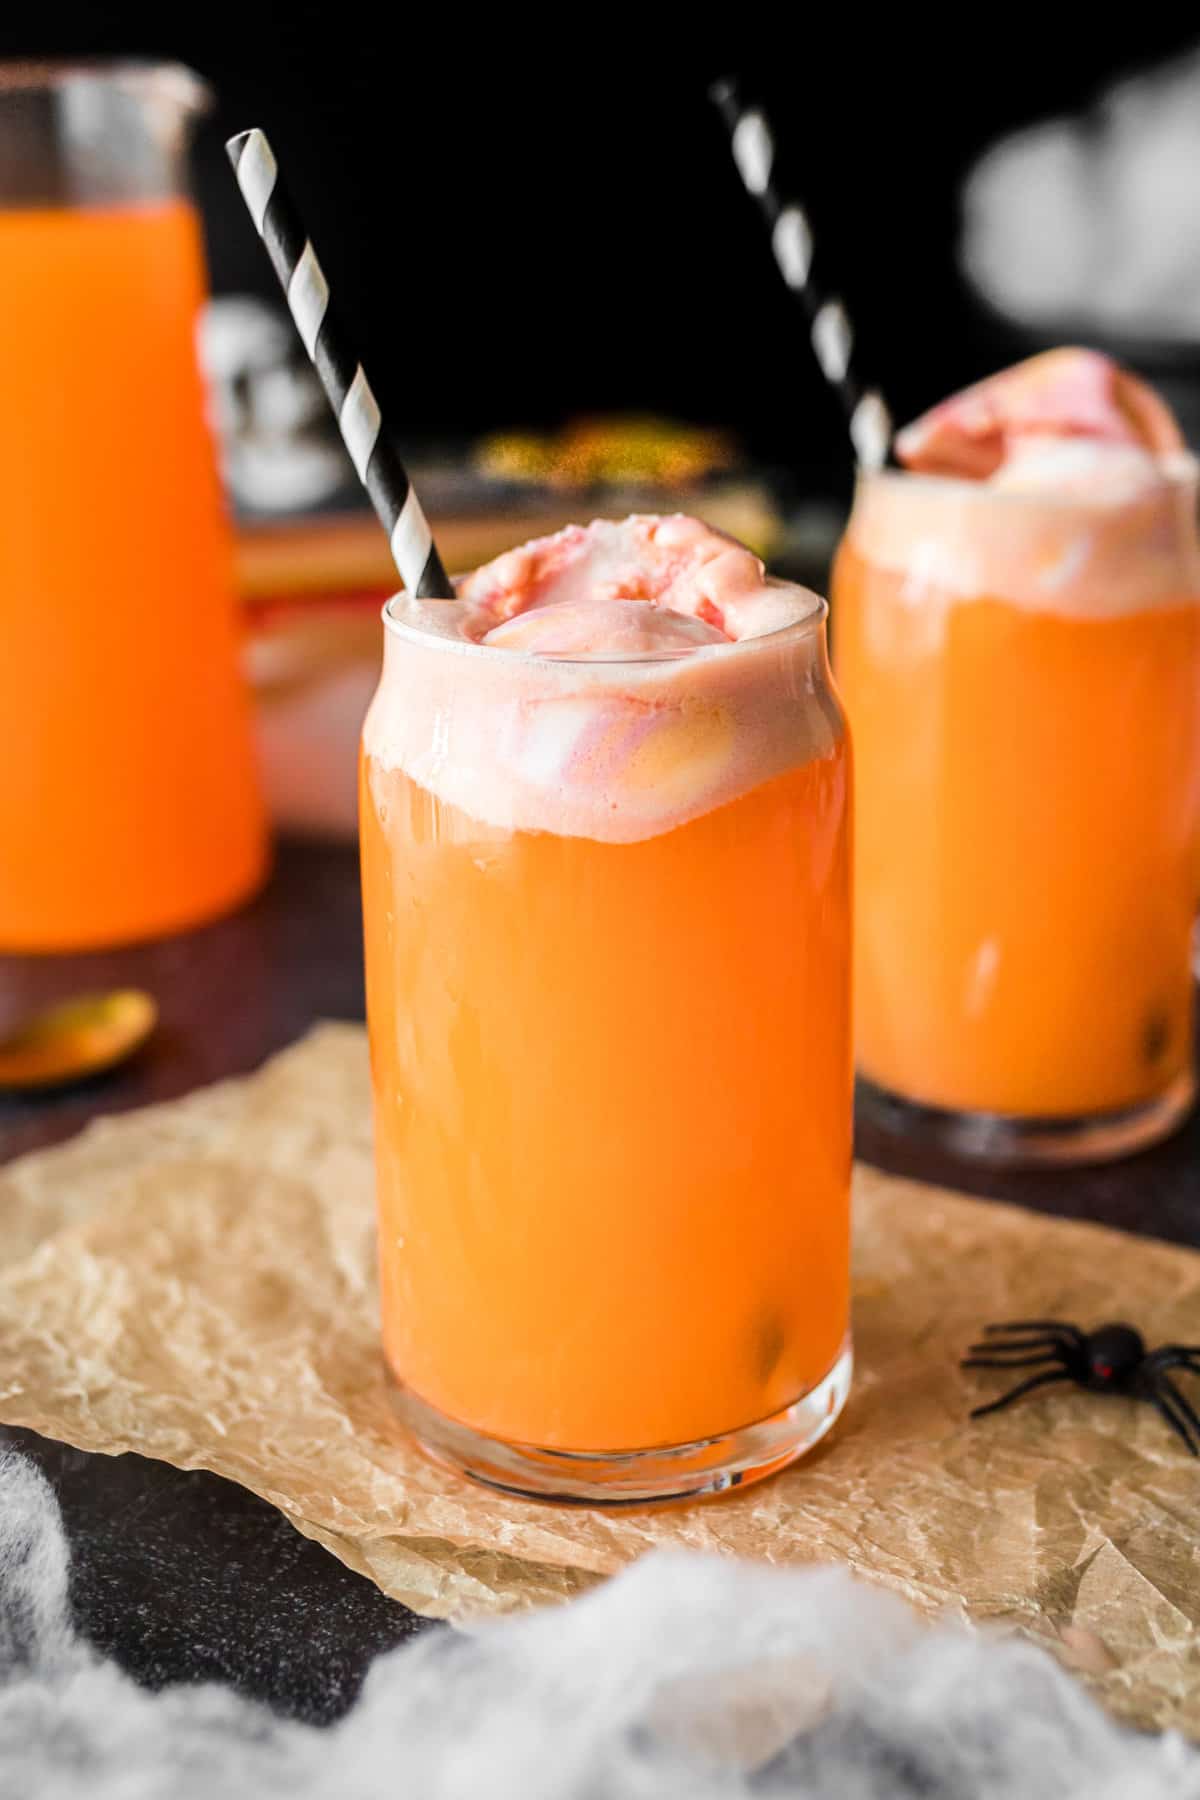 Orange Halloween punch in tall glass topped with sherbet. Another filled glass and pitcher of the punch are in the background.